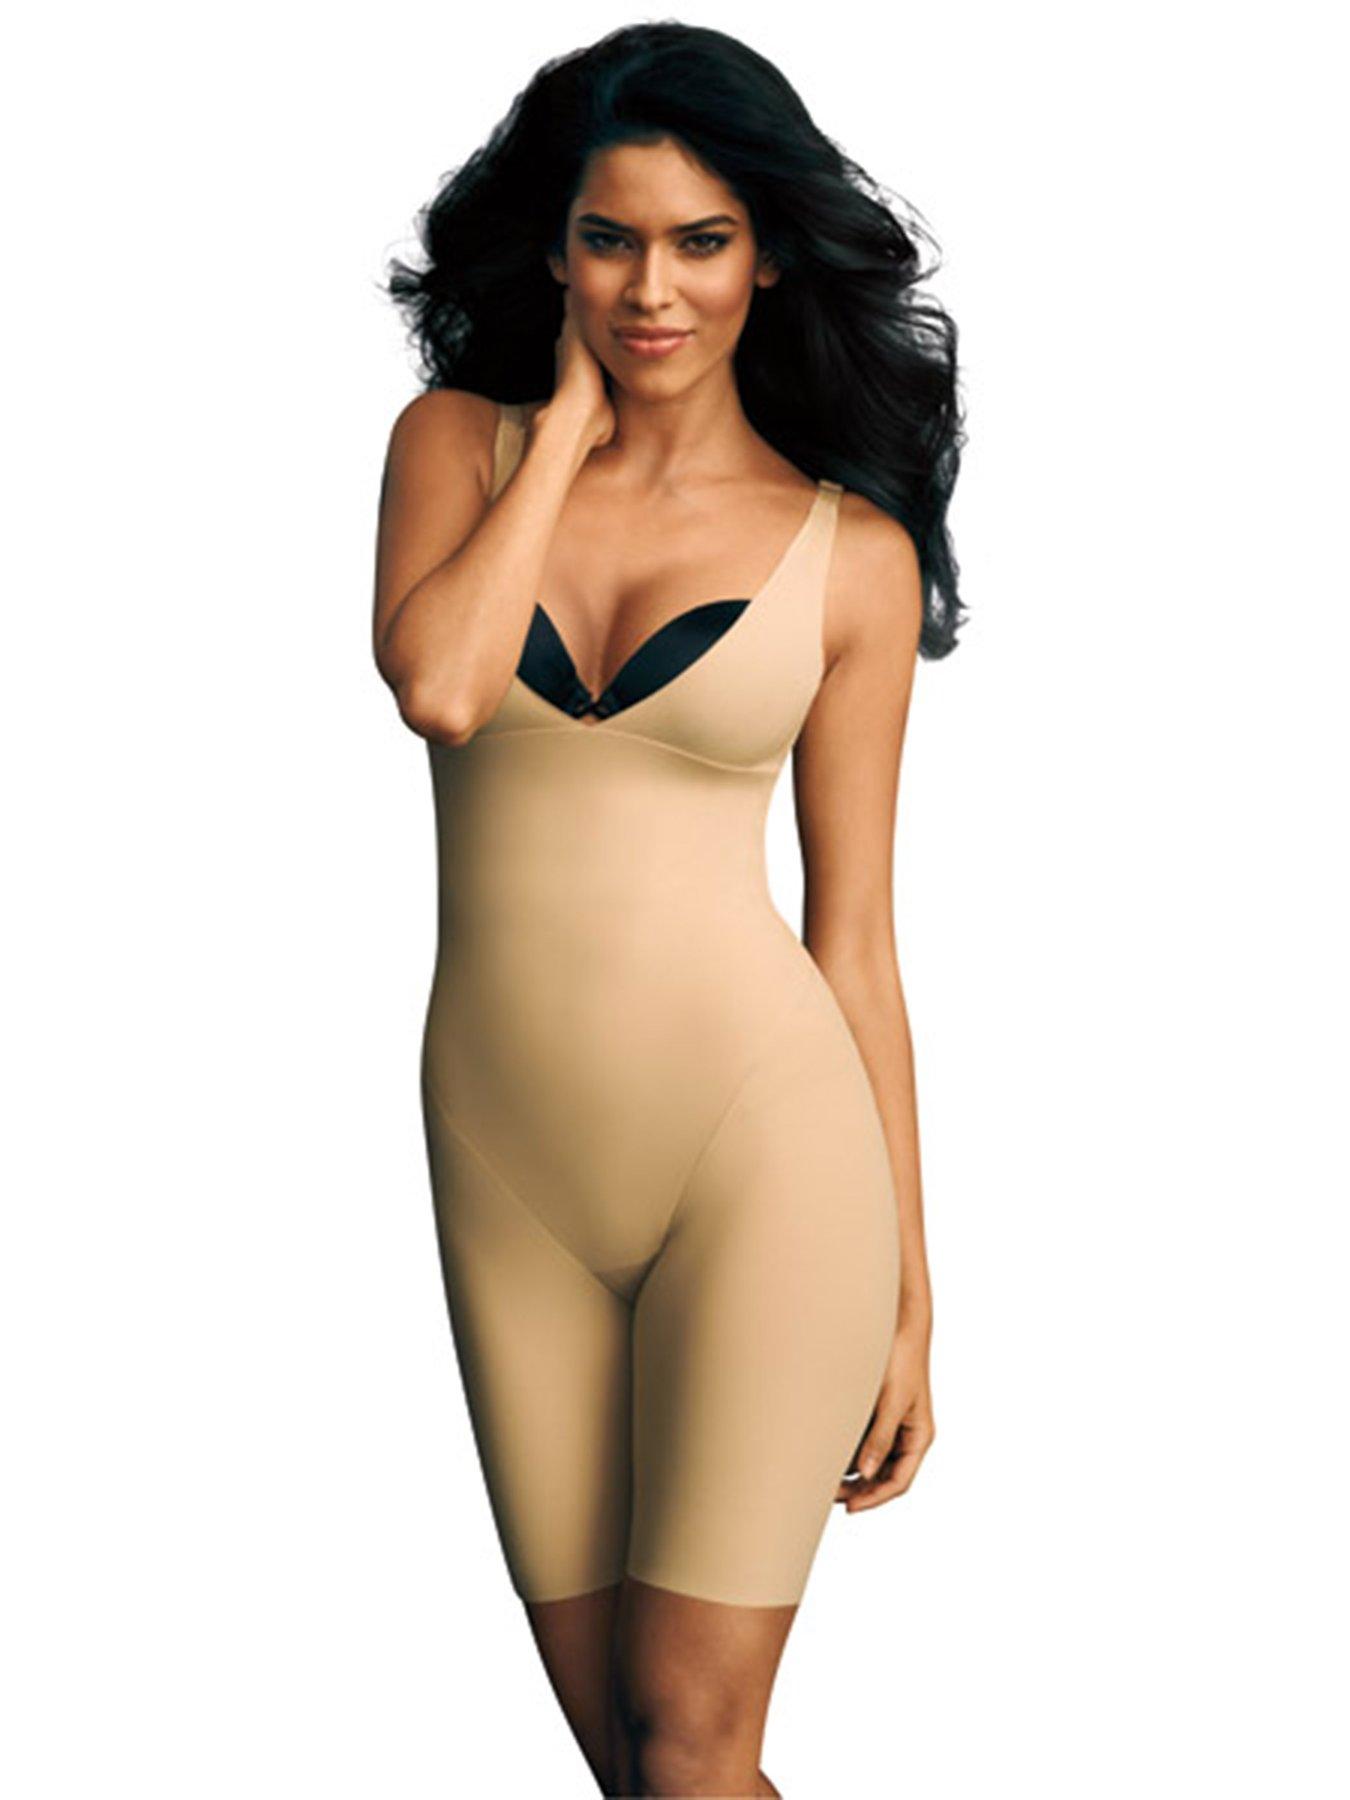 Flawlessly Shape Your Figure with Maidenform Women's Wear Your Own